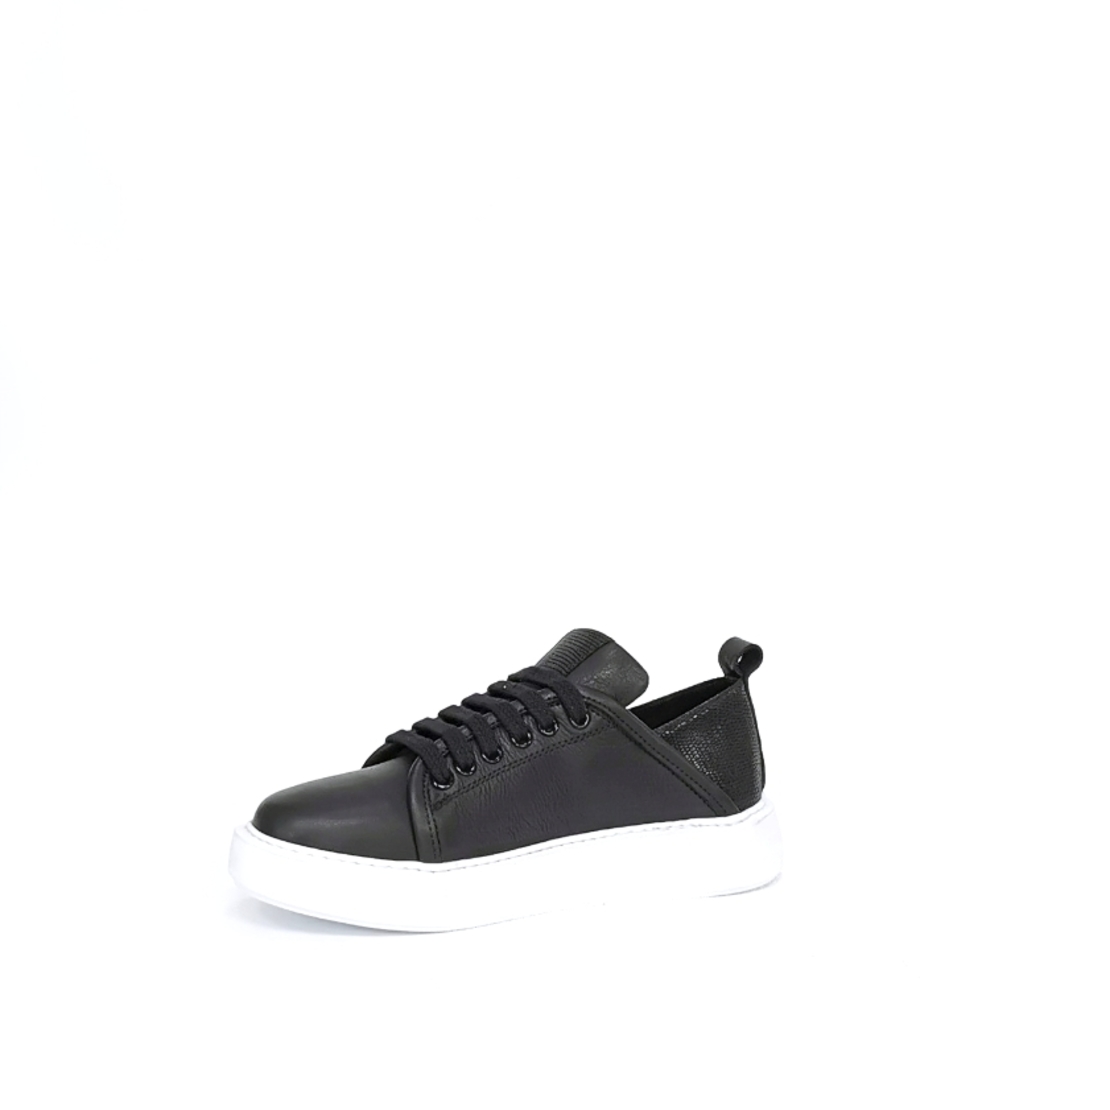 Women's sneaker made of natural leather in black color with anatomical insole/72100